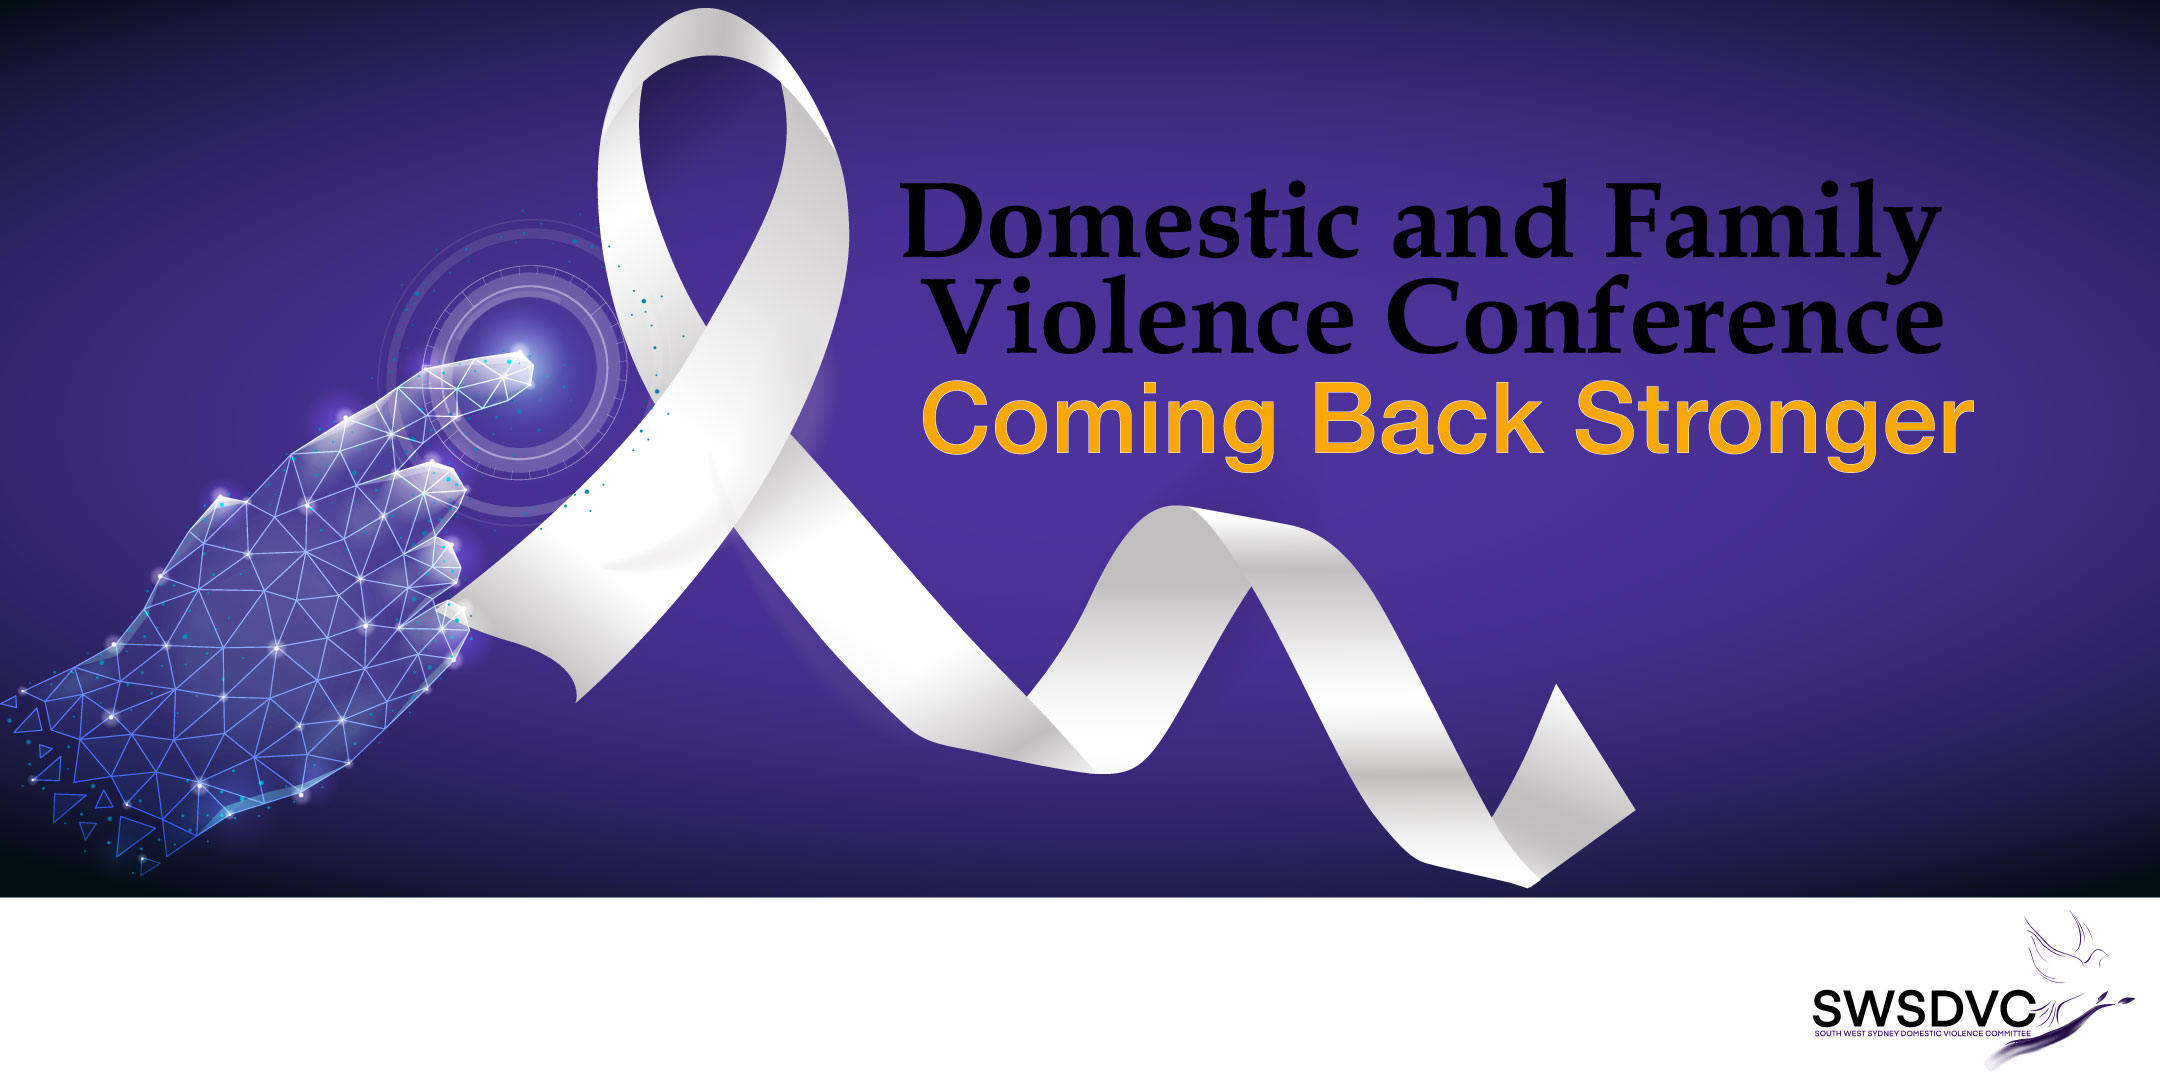 Domestic and Family Violence Conference: Coming Back Stronger